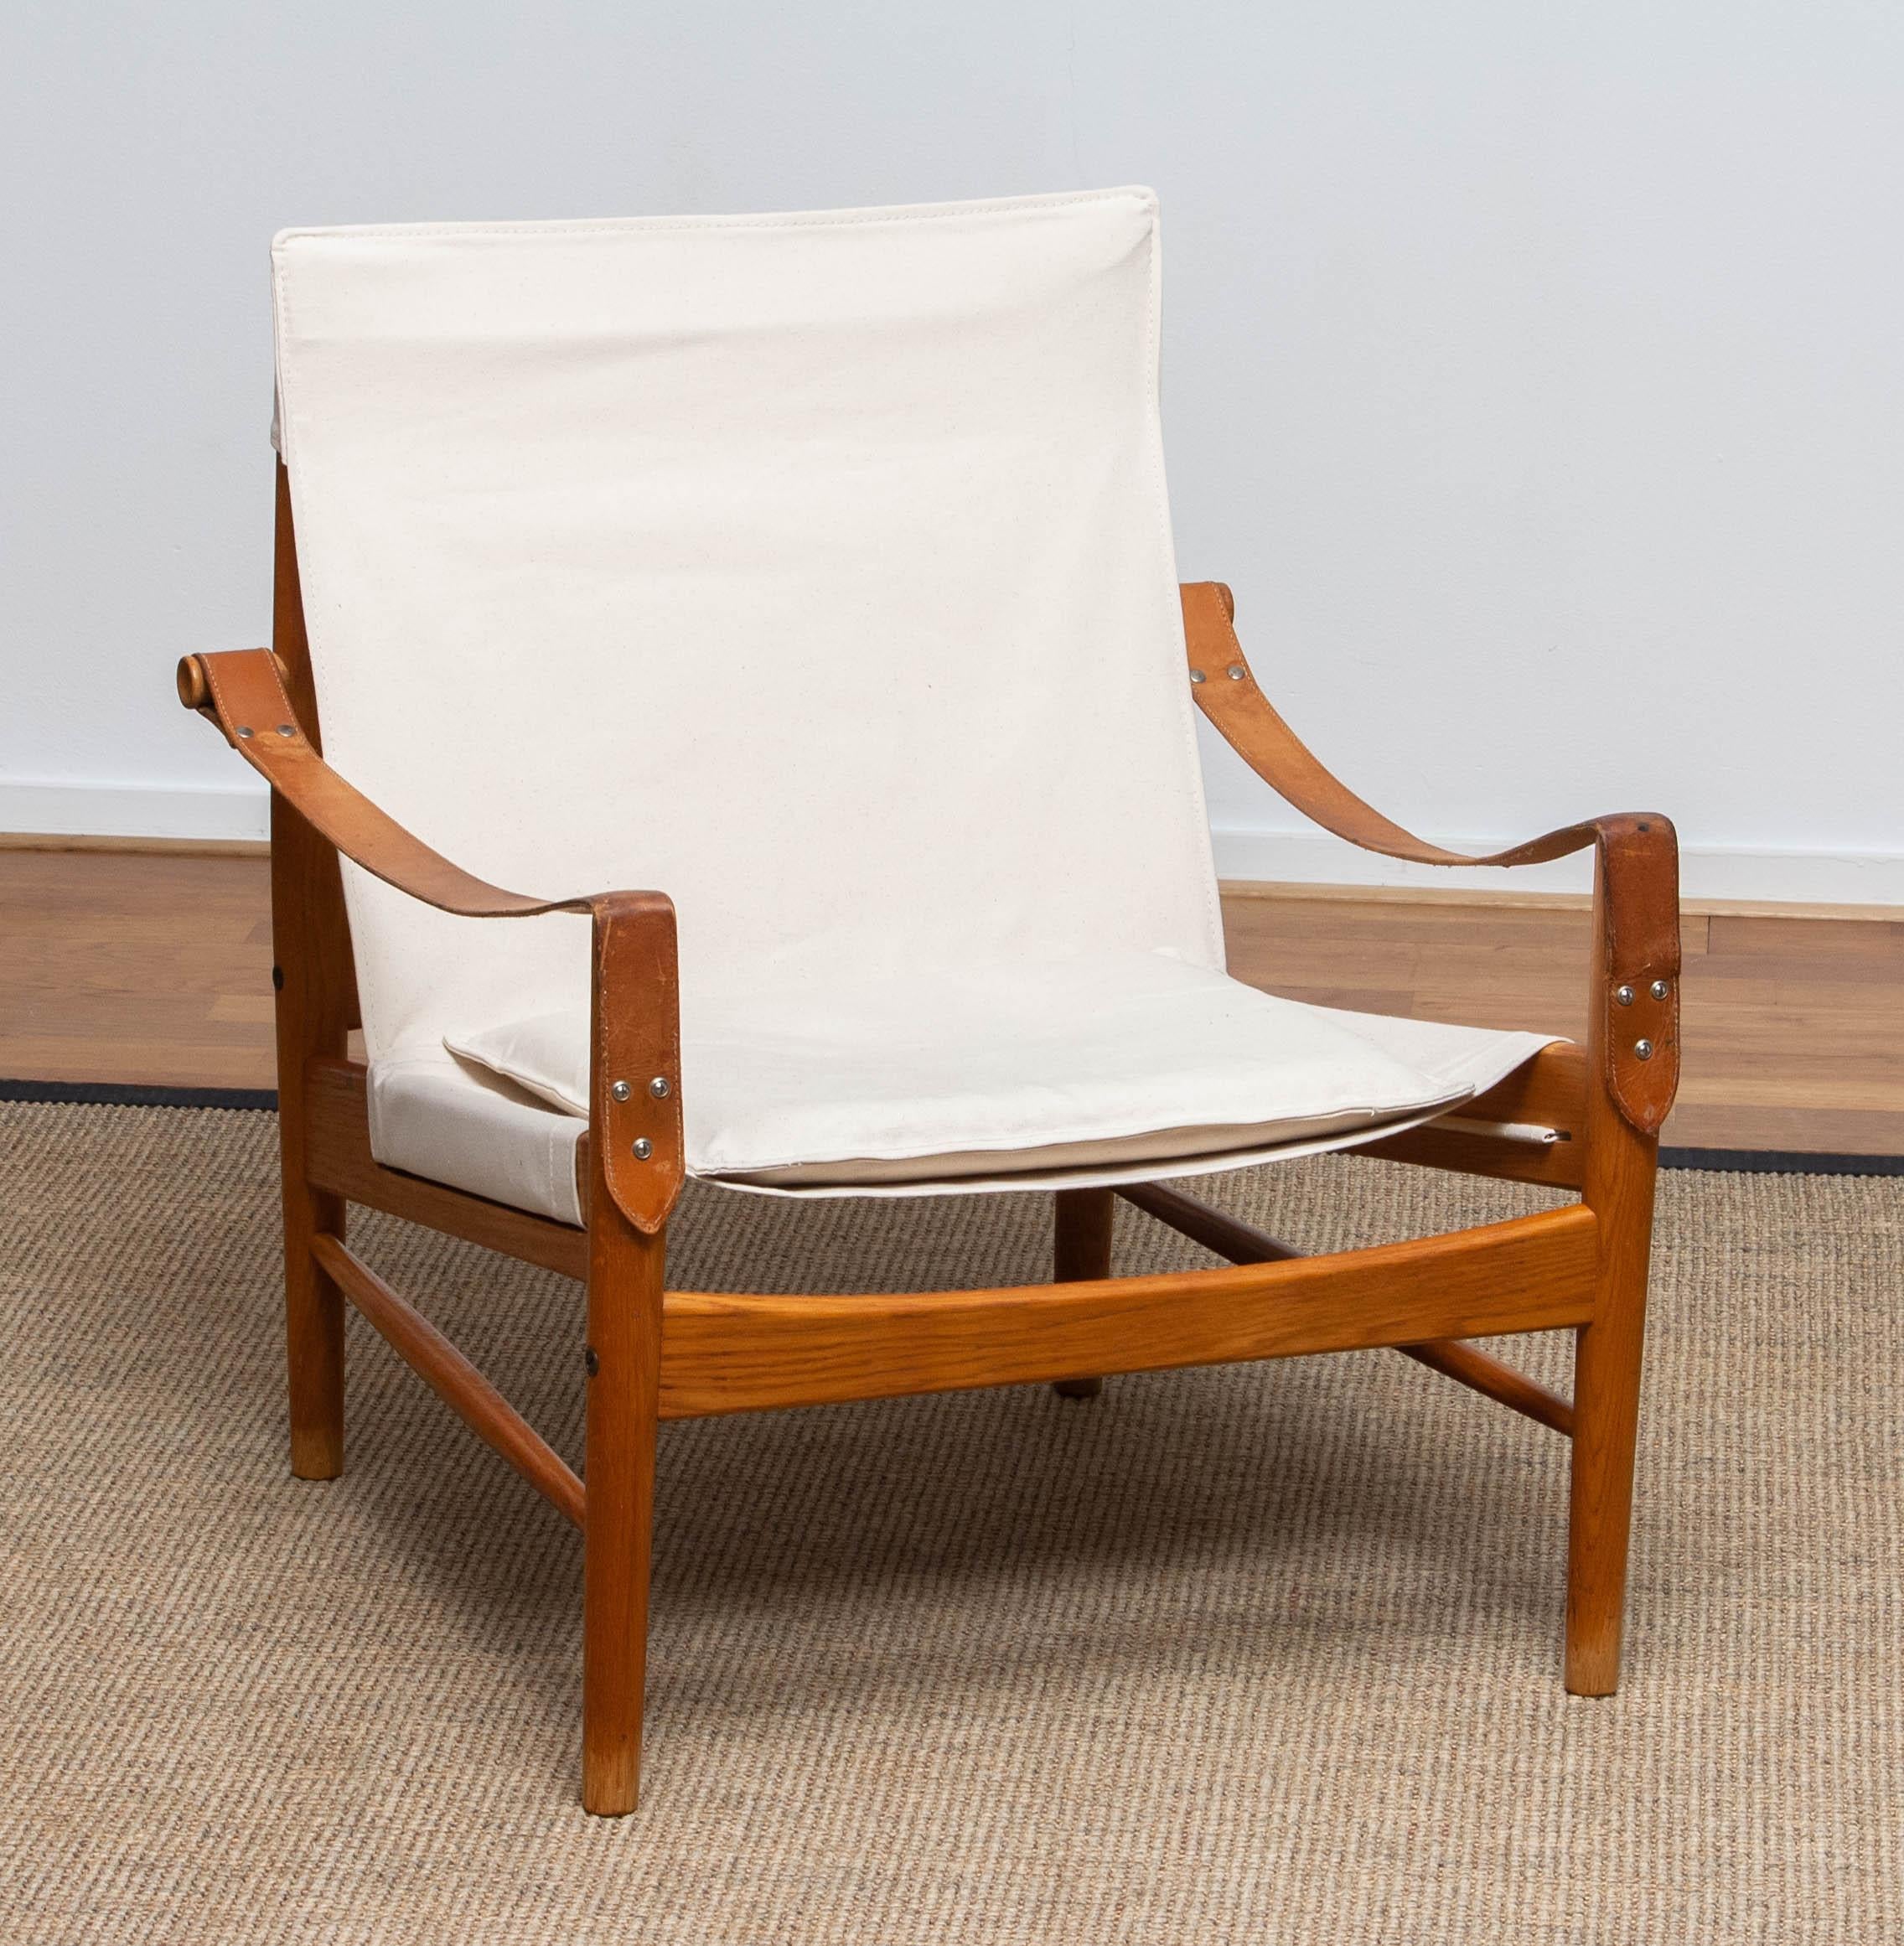 Beautiful safari chair designed by Hans Olsen for Viska Möbler in Kinna, Sweden.
This chairs are made of oak with a new canvas upholstery.
It is in a wonderful condition and marked.
Period 1960s.
Dimensions: H 81 cm, W 73 cm, D 70 cm, SH 38 cm.